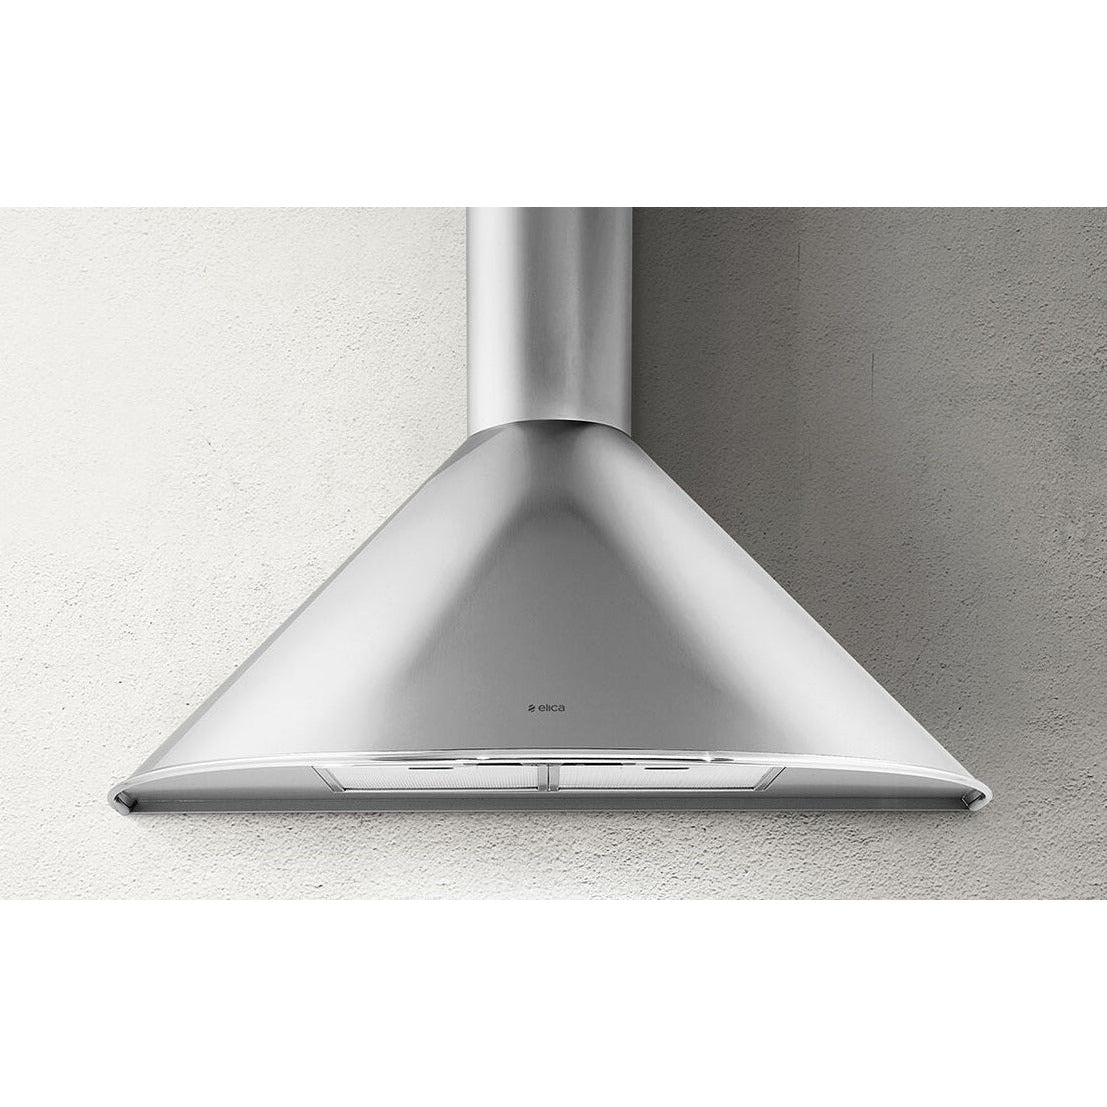 Elica Tonda 90cm Chimney Cooker Hood - Stainless Steel | TONDA90 from Elica - DID Electrical